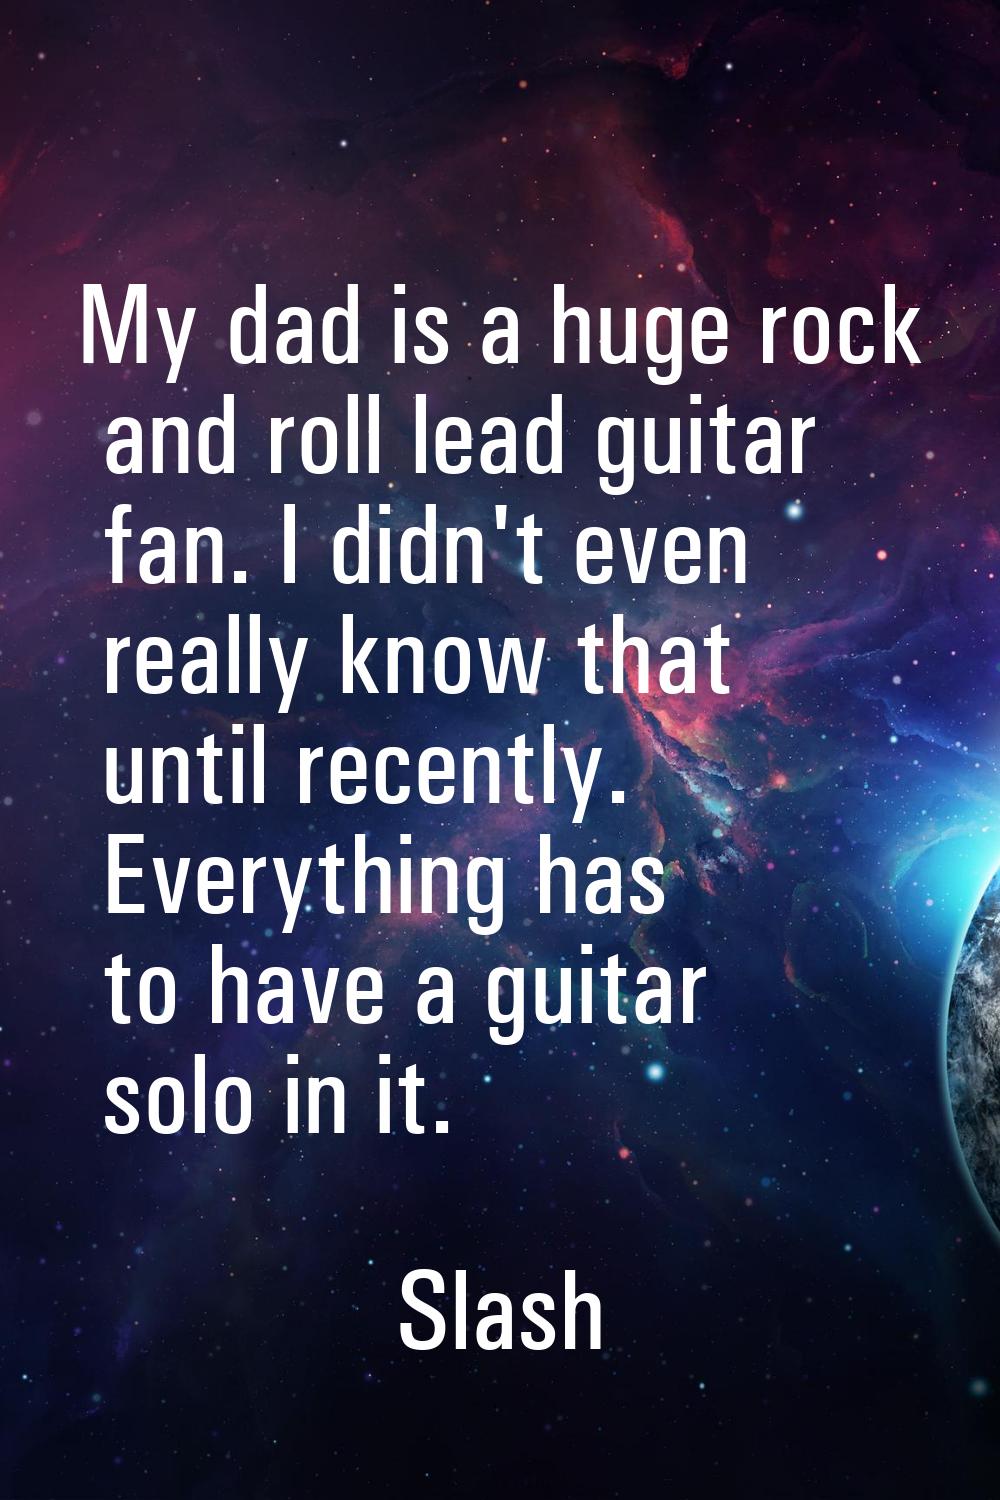 My dad is a huge rock and roll lead guitar fan. I didn't even really know that until recently. Ever